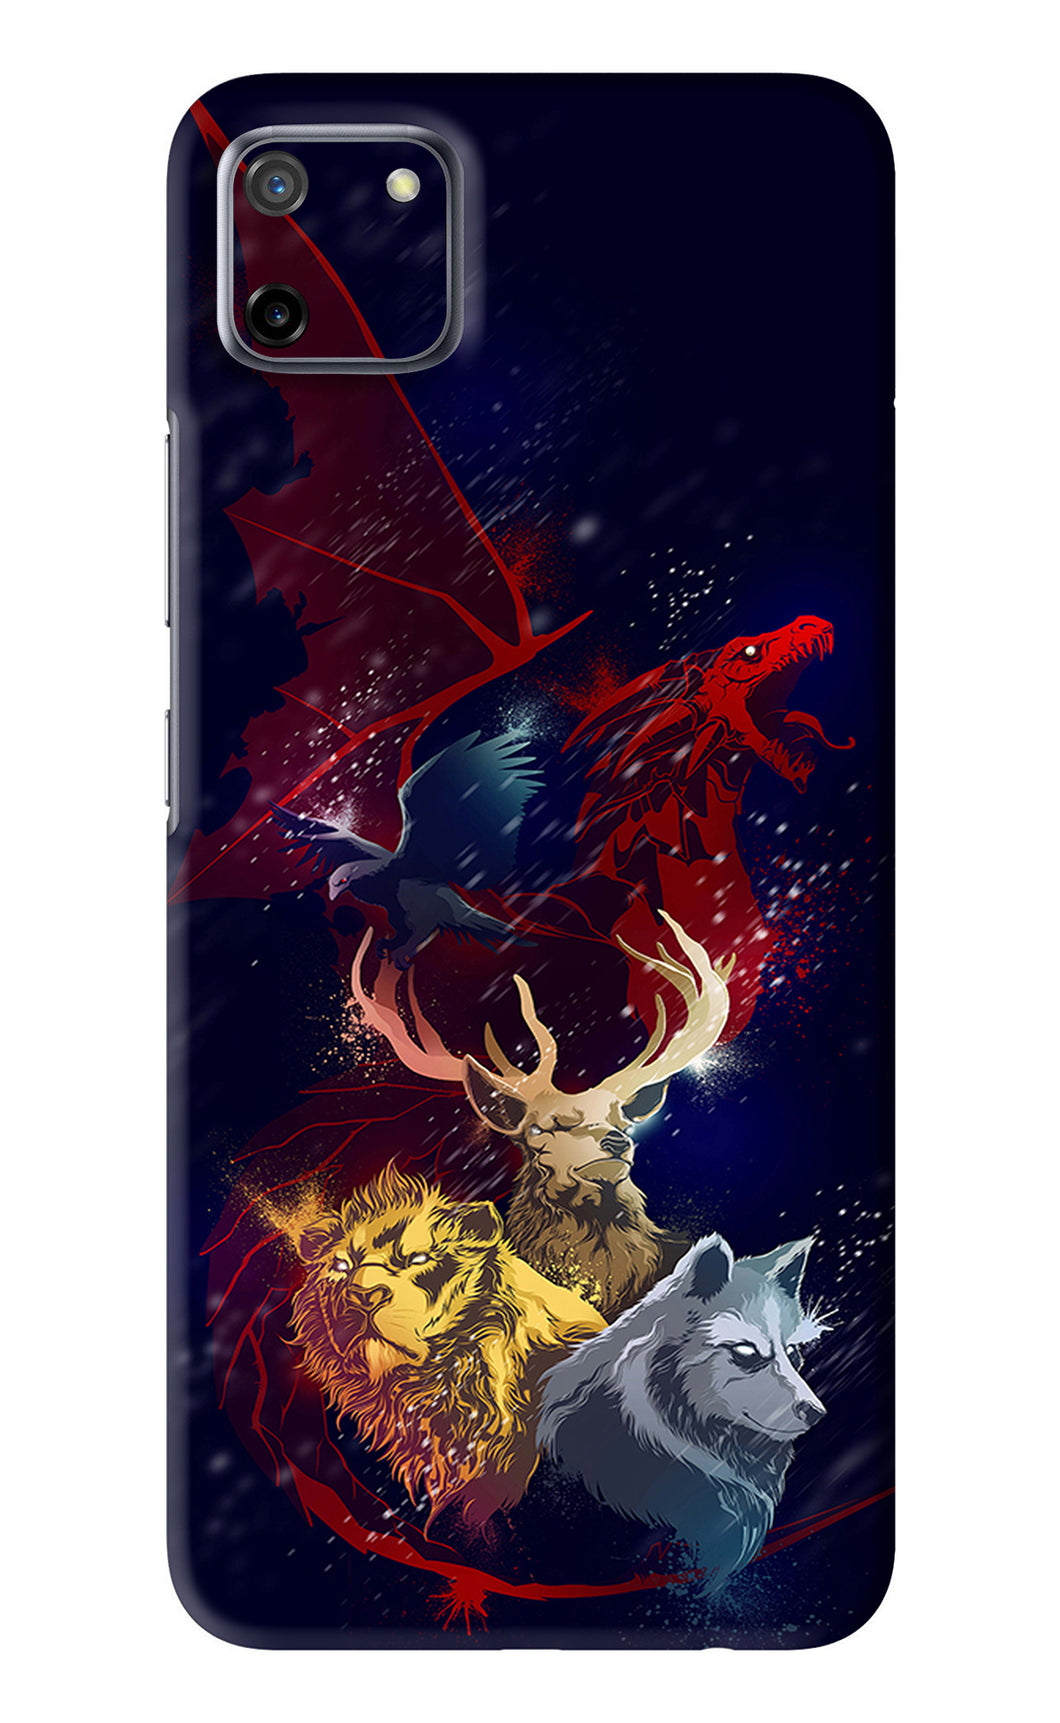 Game Of Thrones Realme C11 Back Skin Wrap